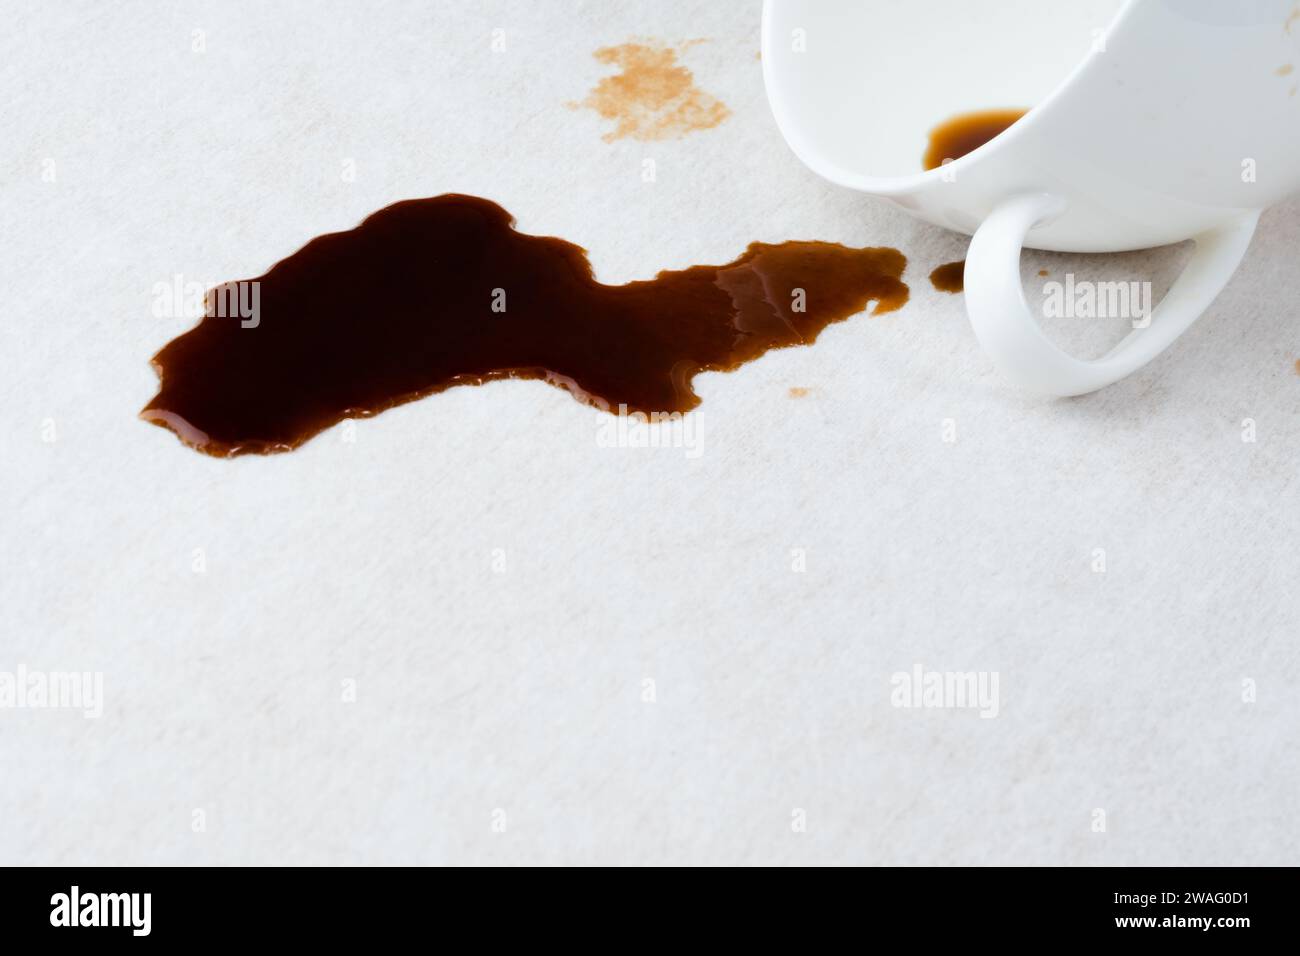 Spilled coffee on the upholstery of the couch or carpet. dirty stains in daily life for cleaning concept. Stock Photo